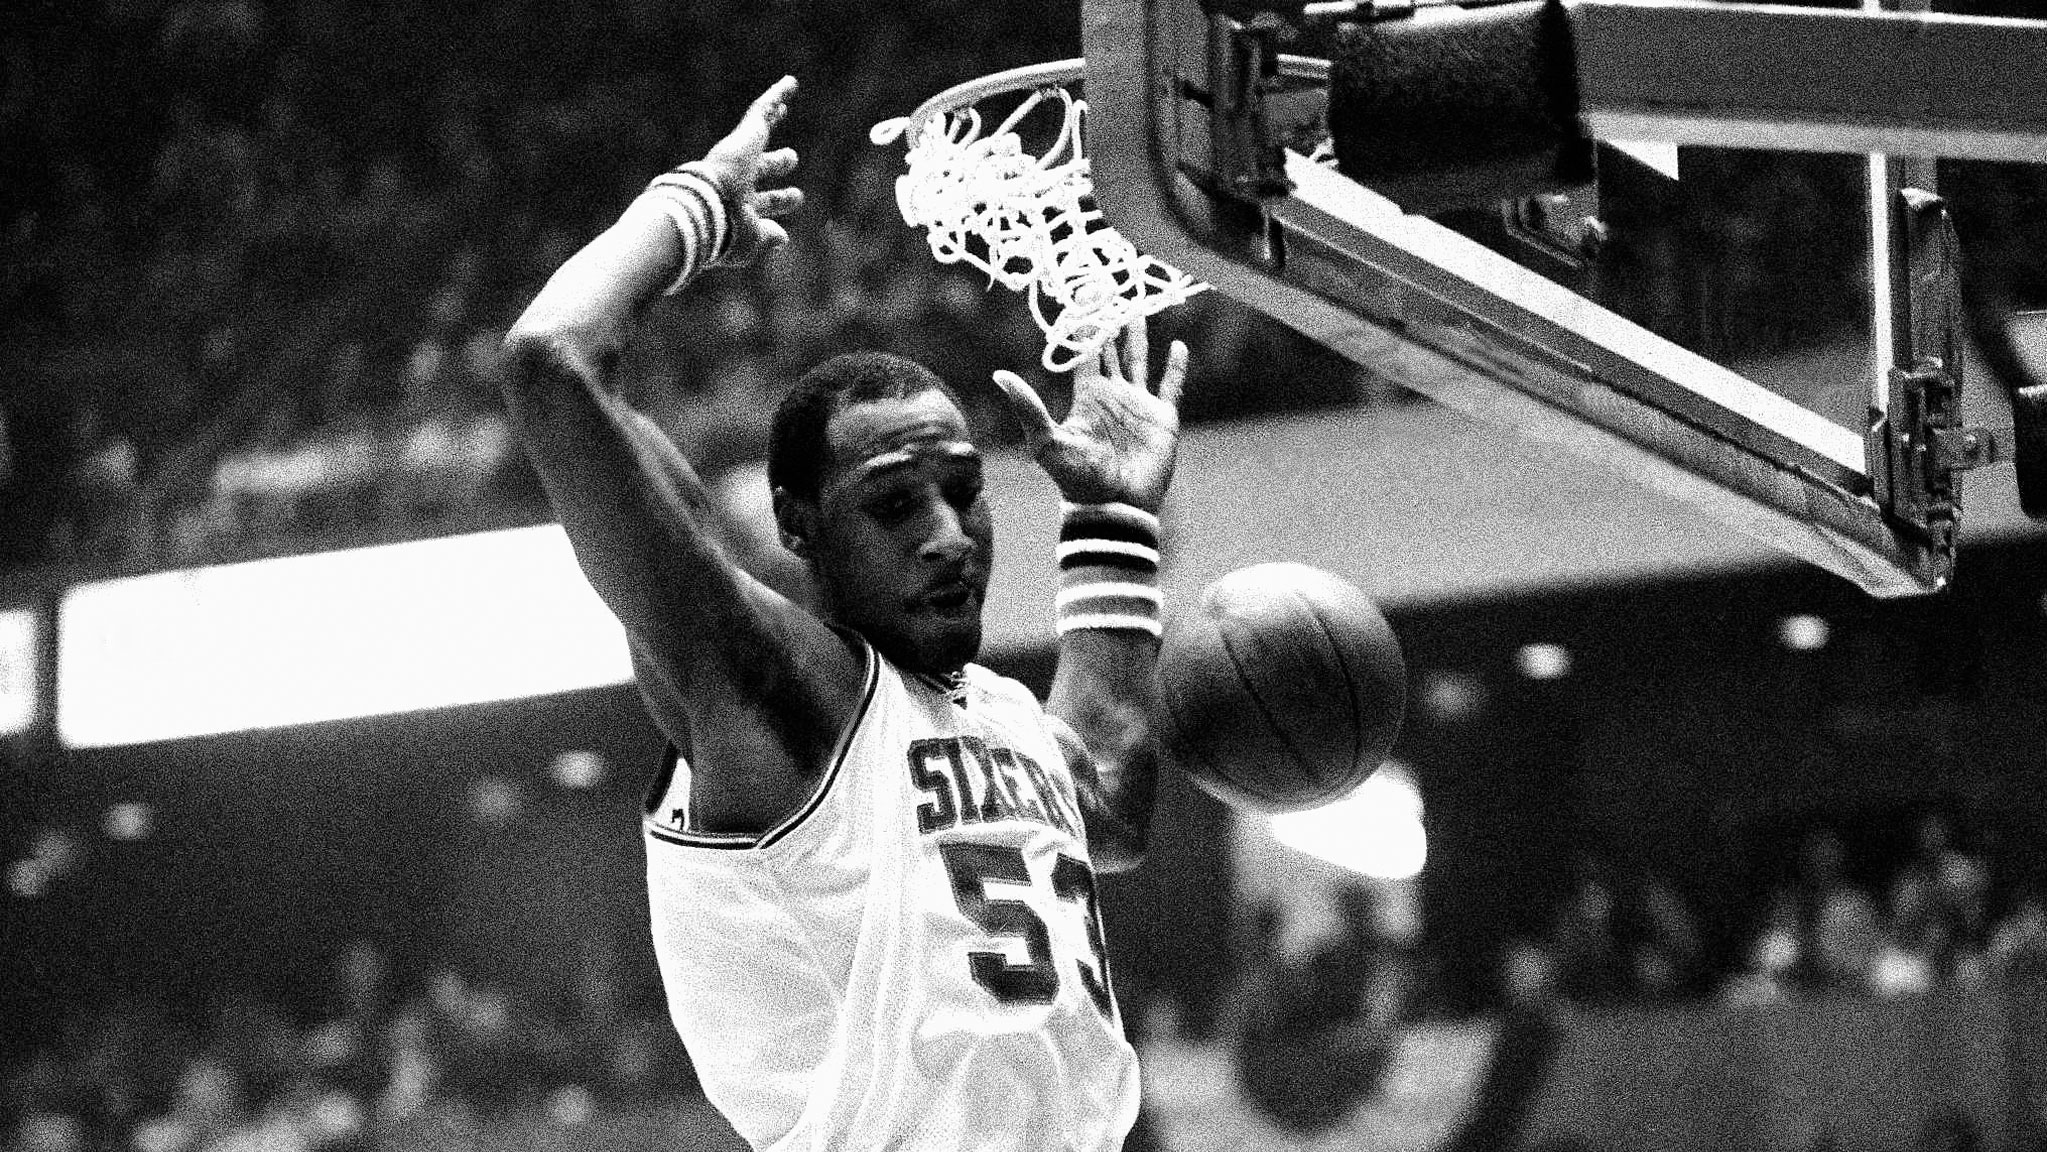 Sixers Darryl Dawkins hammers another dunk shot through the net to score against the Atlanta Hawks in an NBA playoff game, in this April 15, 1980 file photo, in Philadelphia.
